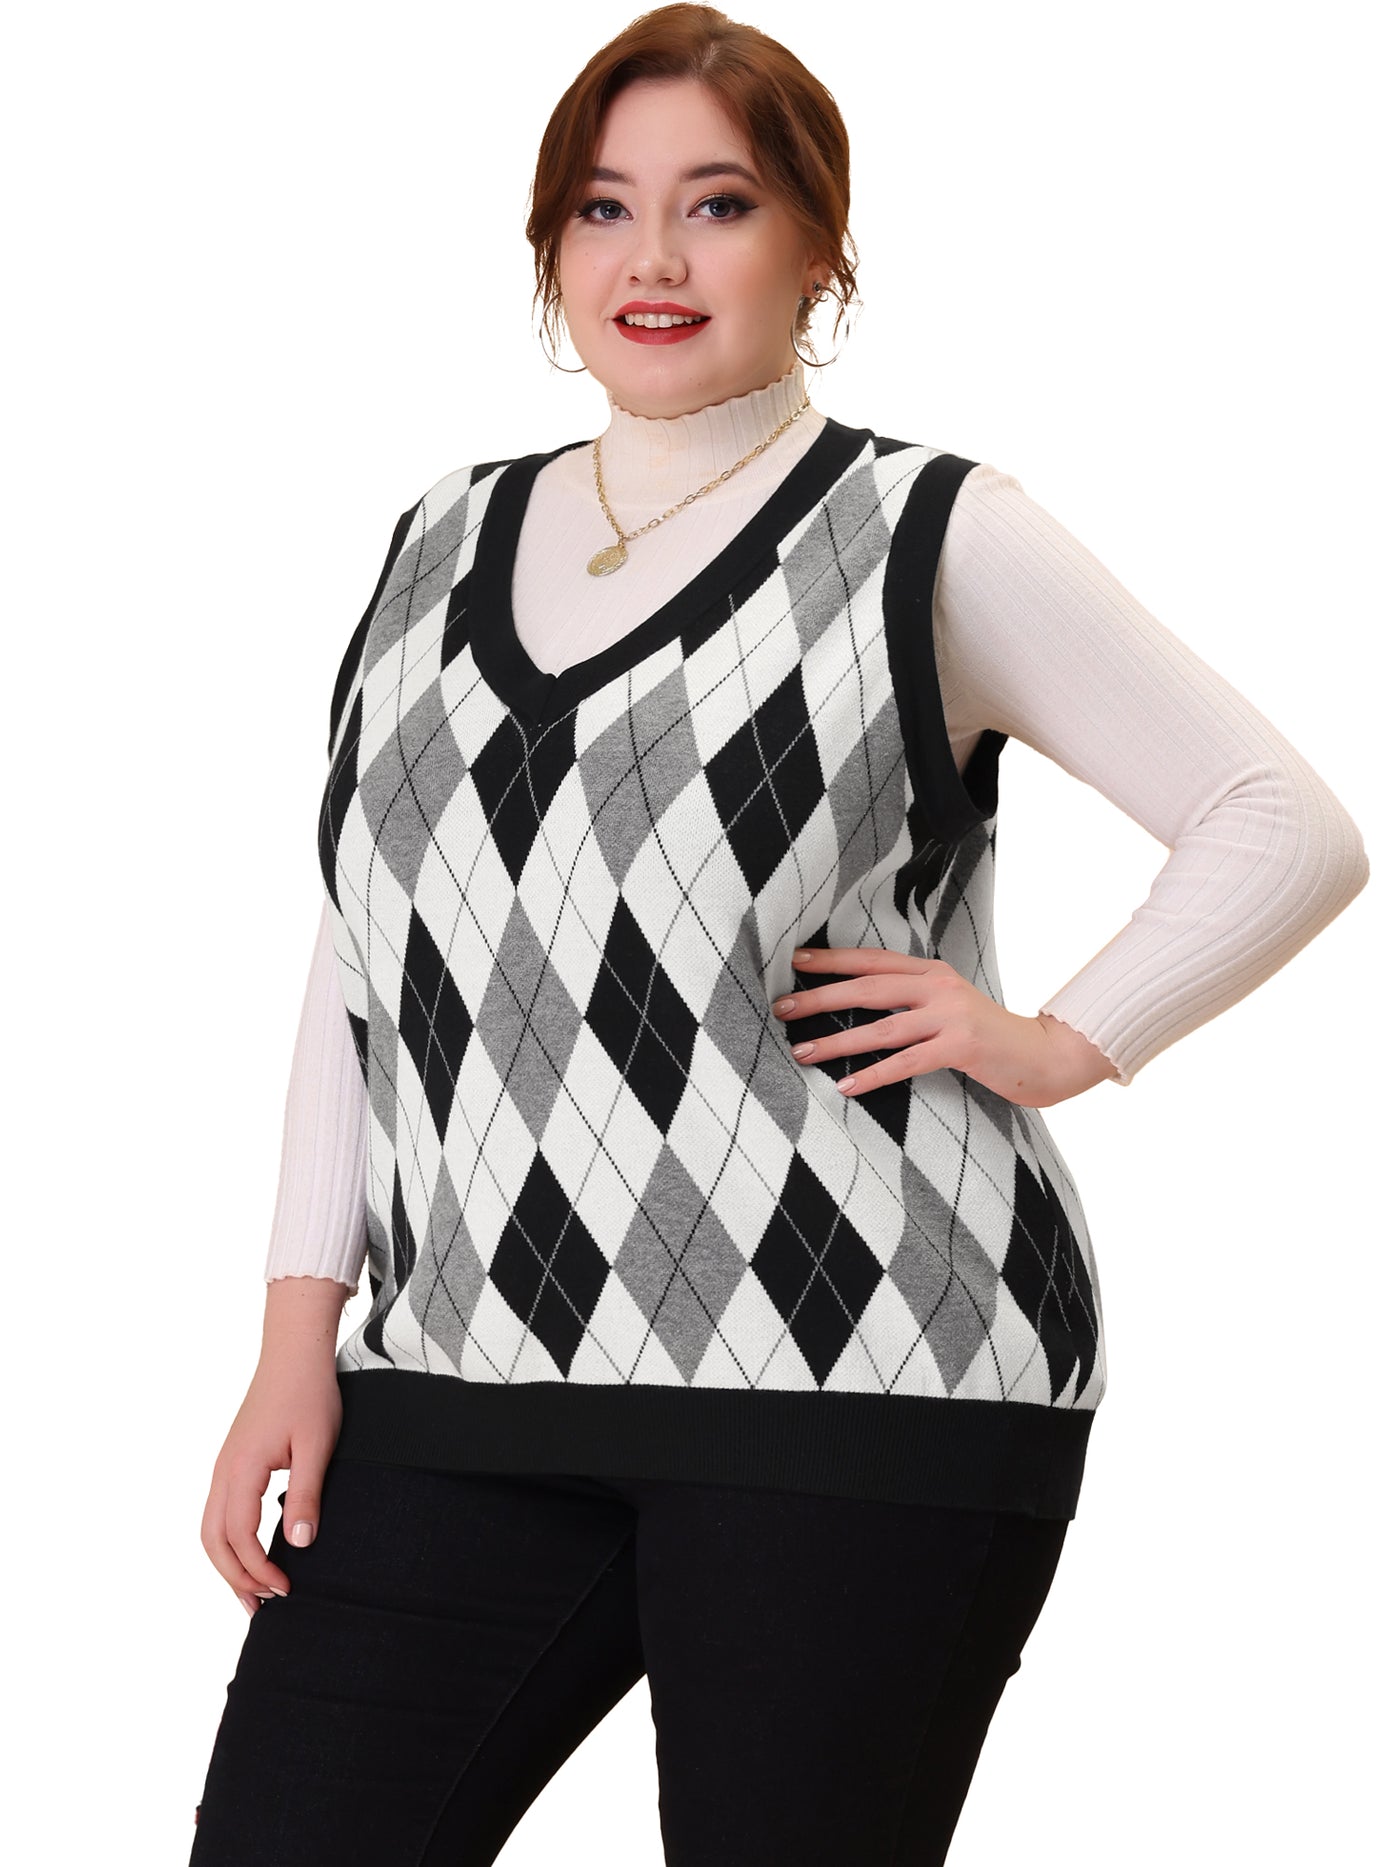 Bublédon Plus Size Vest for Women Cable Knit Sleeveless Pullover Sweater Vests